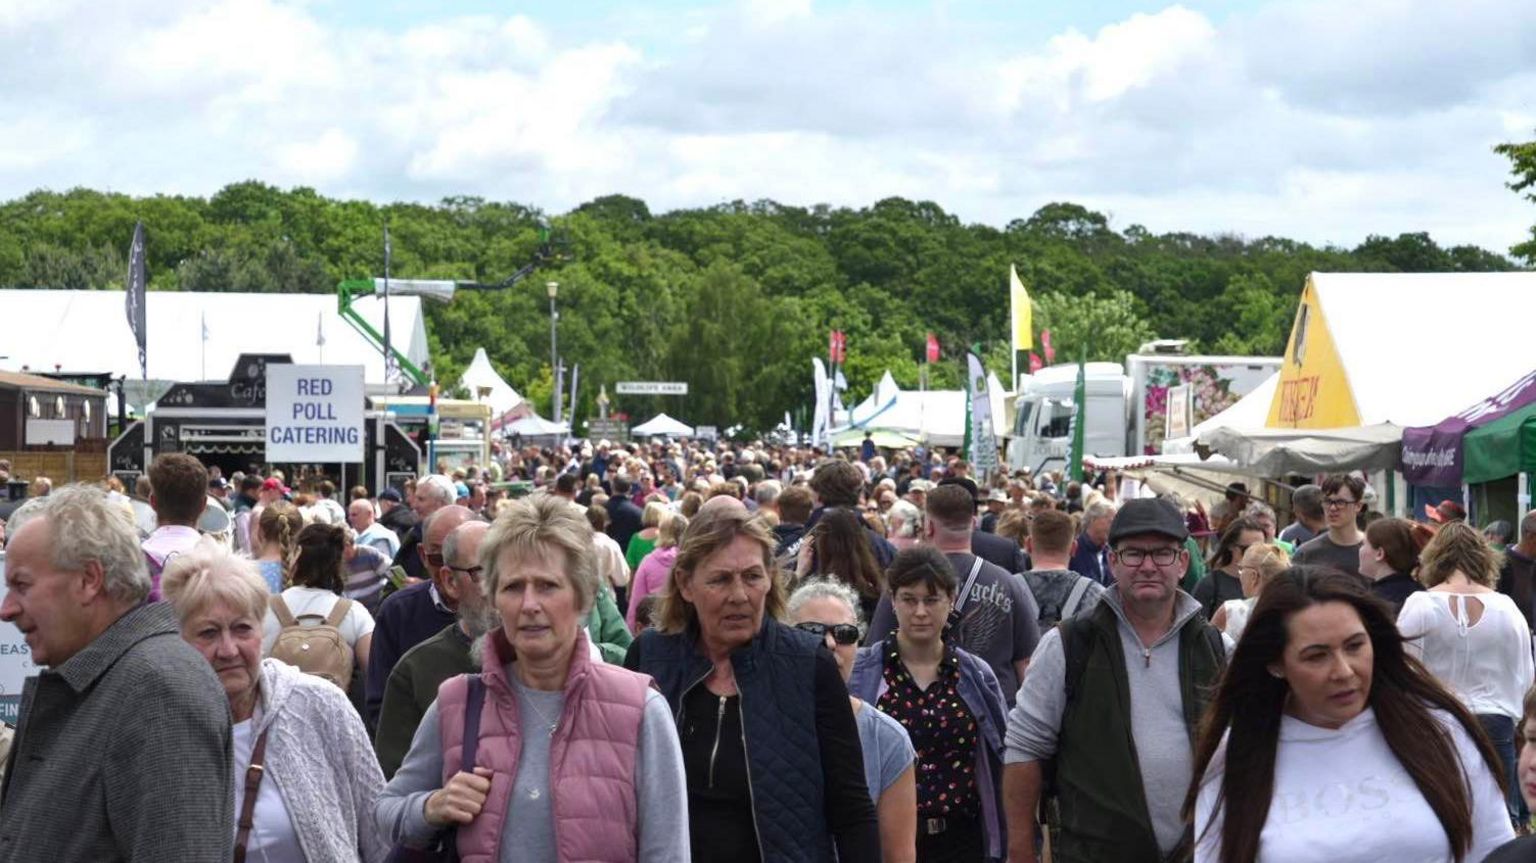 Crowds at the Suffolk Show in Trinity Park, Ipswich